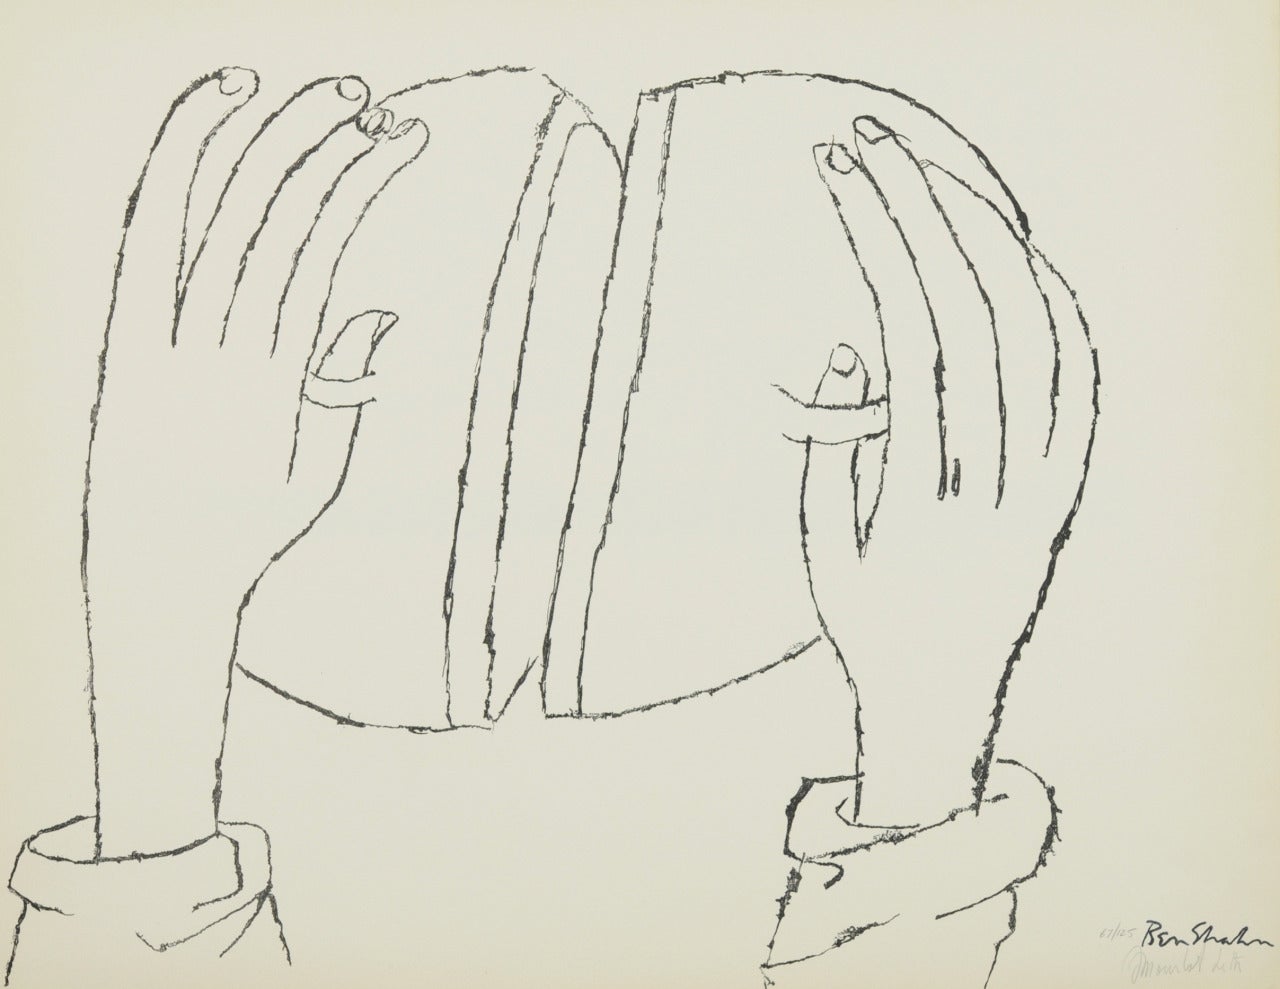 Ben Shahn Figurative Print - Clanging Cymbals (Psalm 150)